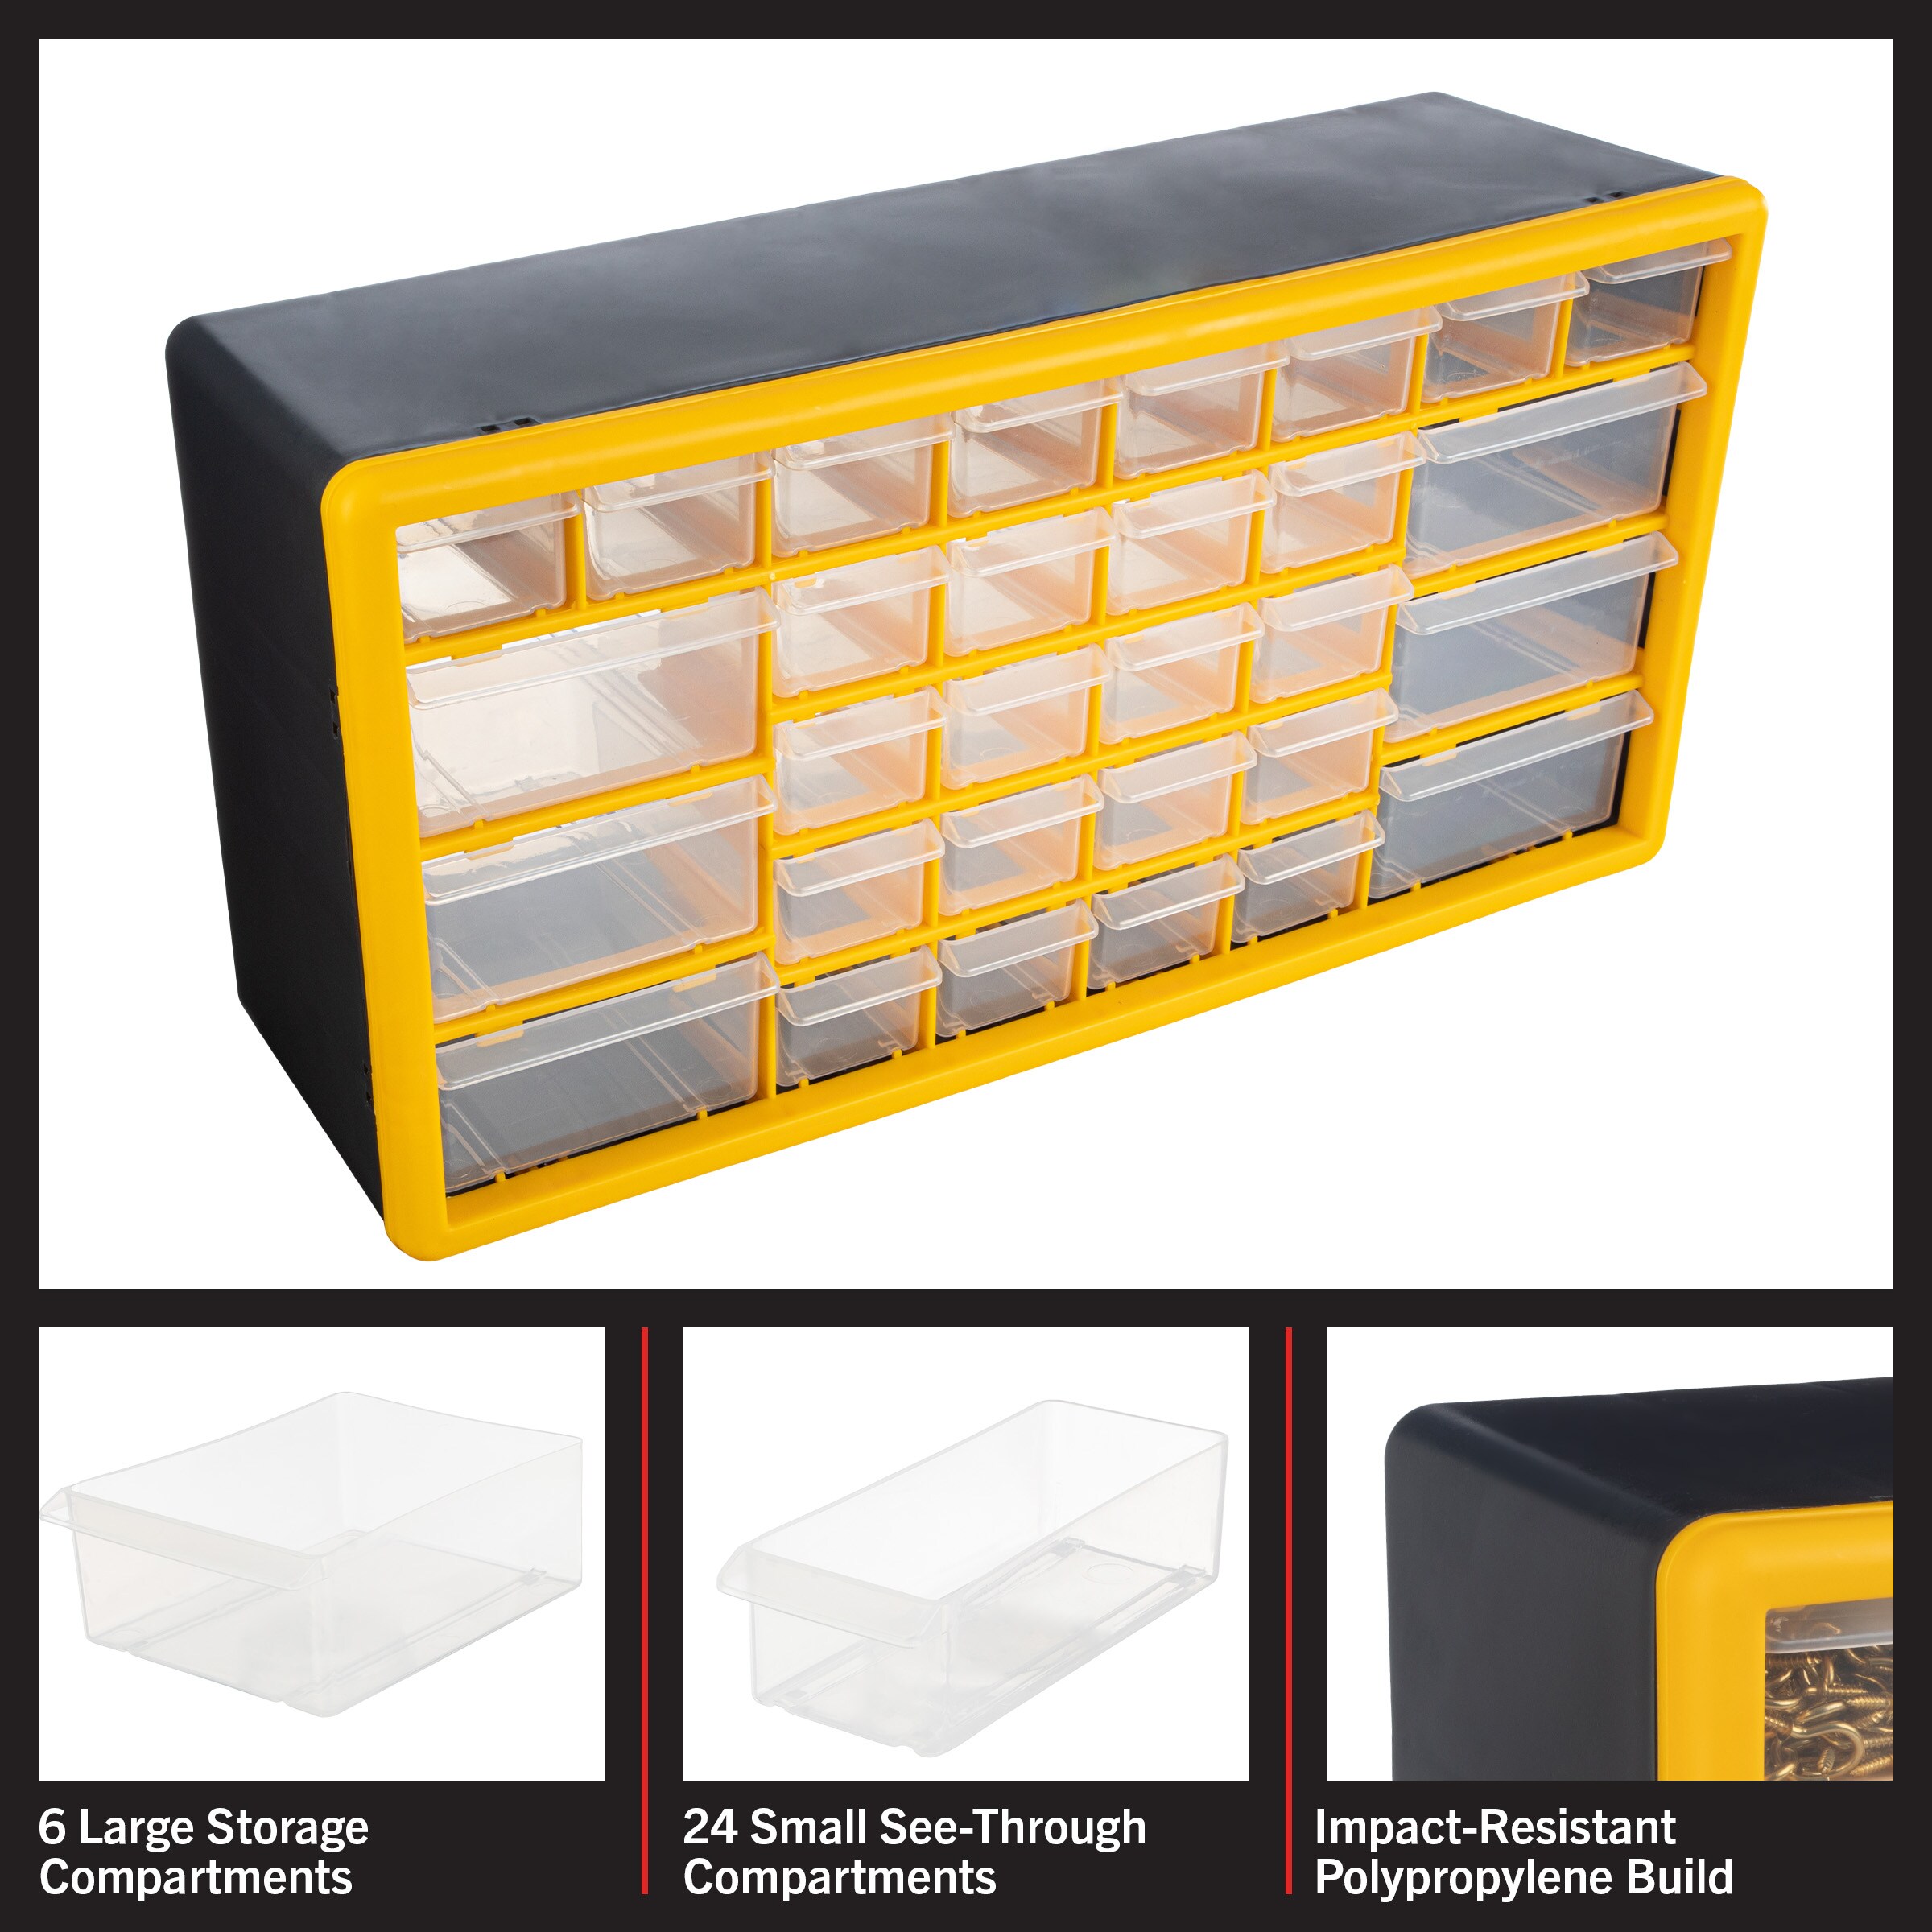 Stalwart Tool Organizer 4-Compartment Plastic Small Parts